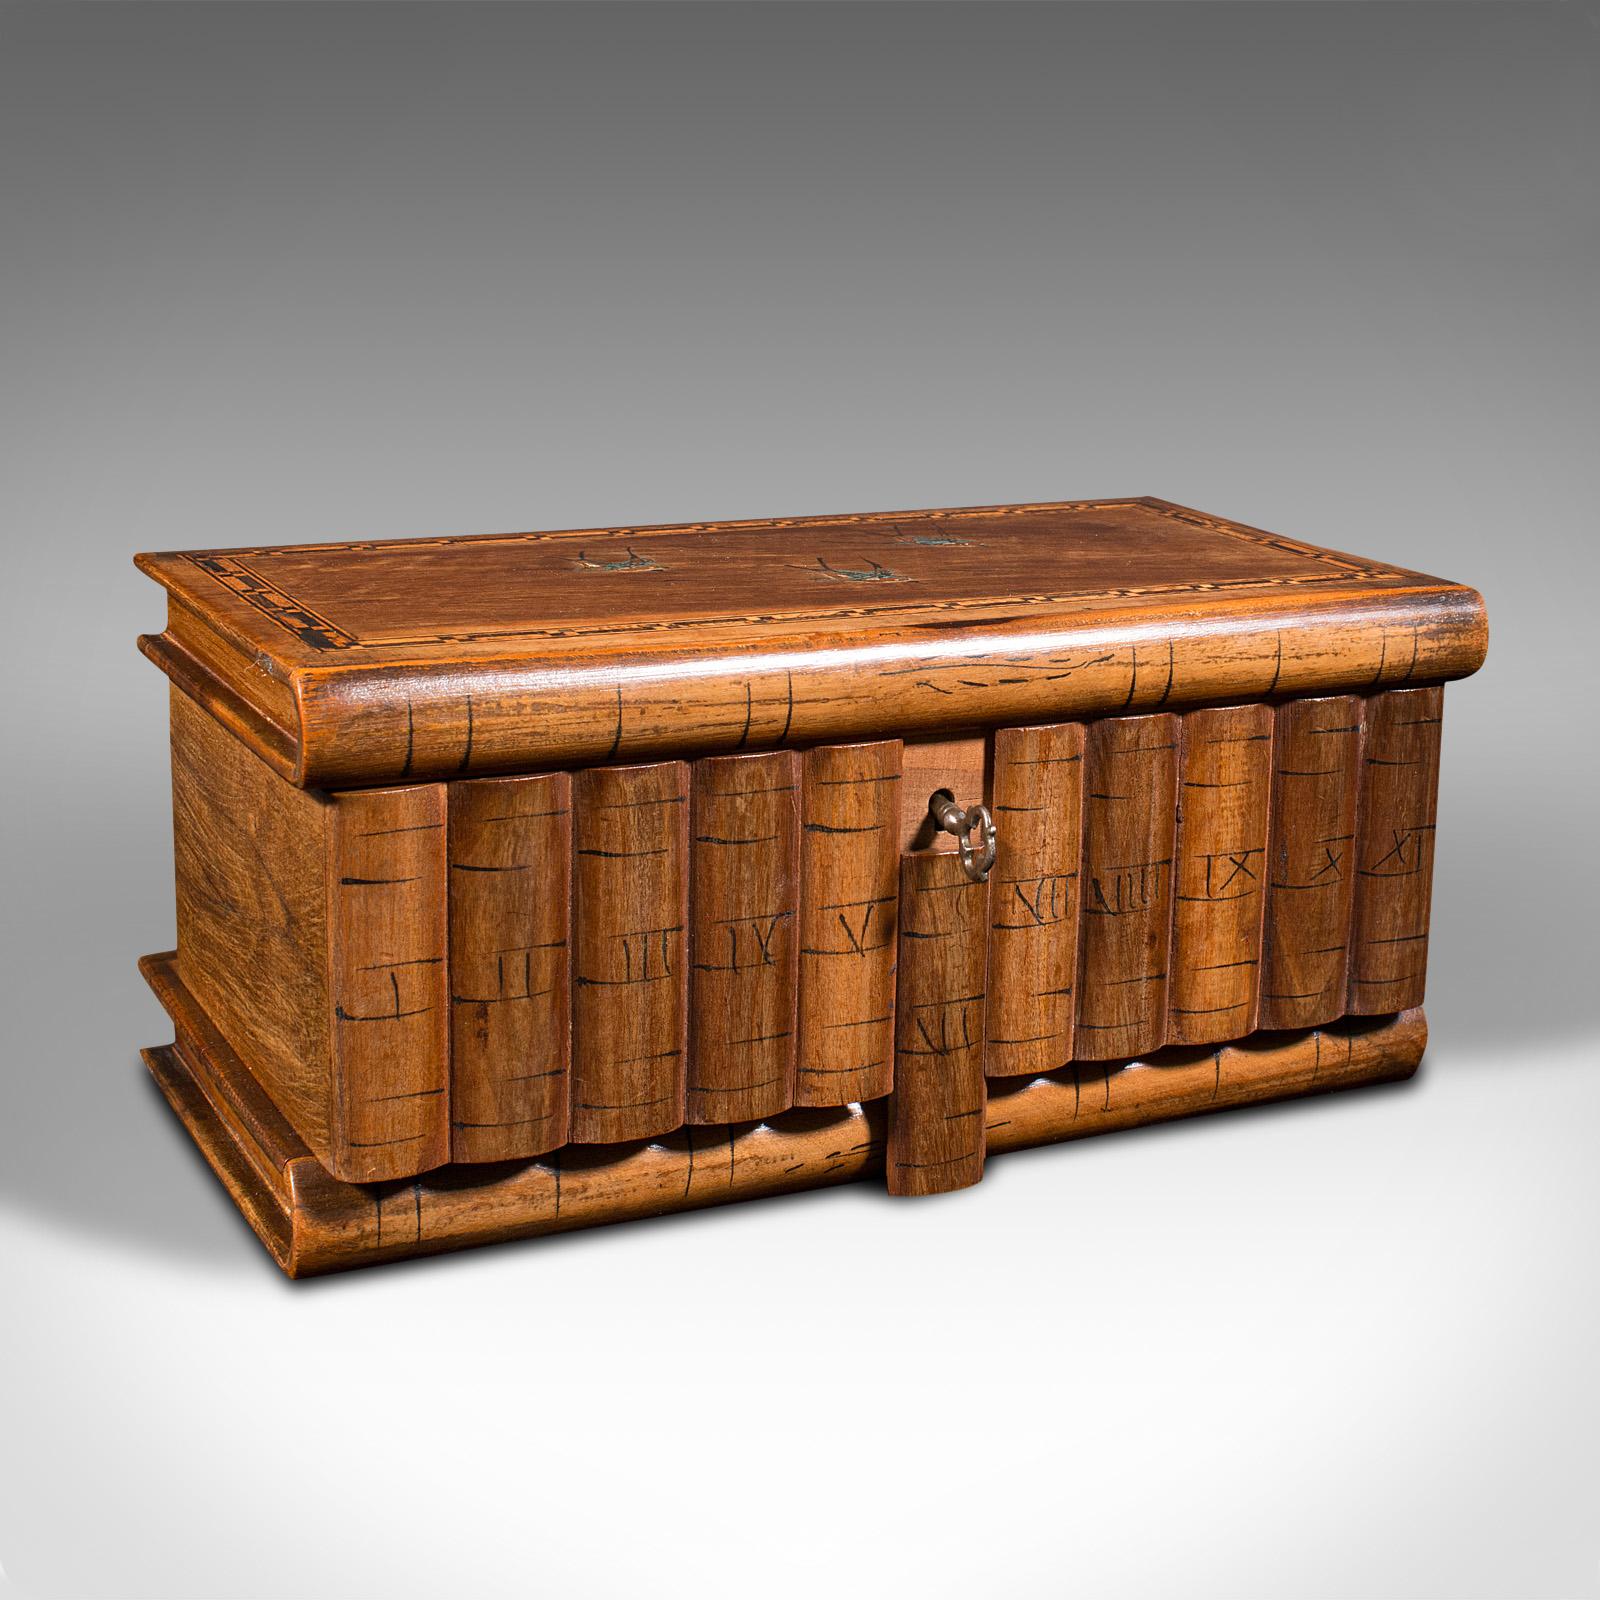 This is an antique ladies vanity box. An Italian, olive wood keepsake or jewellery box, dating to the early 20th century, circa 1920.

Unusual form with a fascinating hidden lock mechanism
Displaying a desirable aged patina and in good order
Select